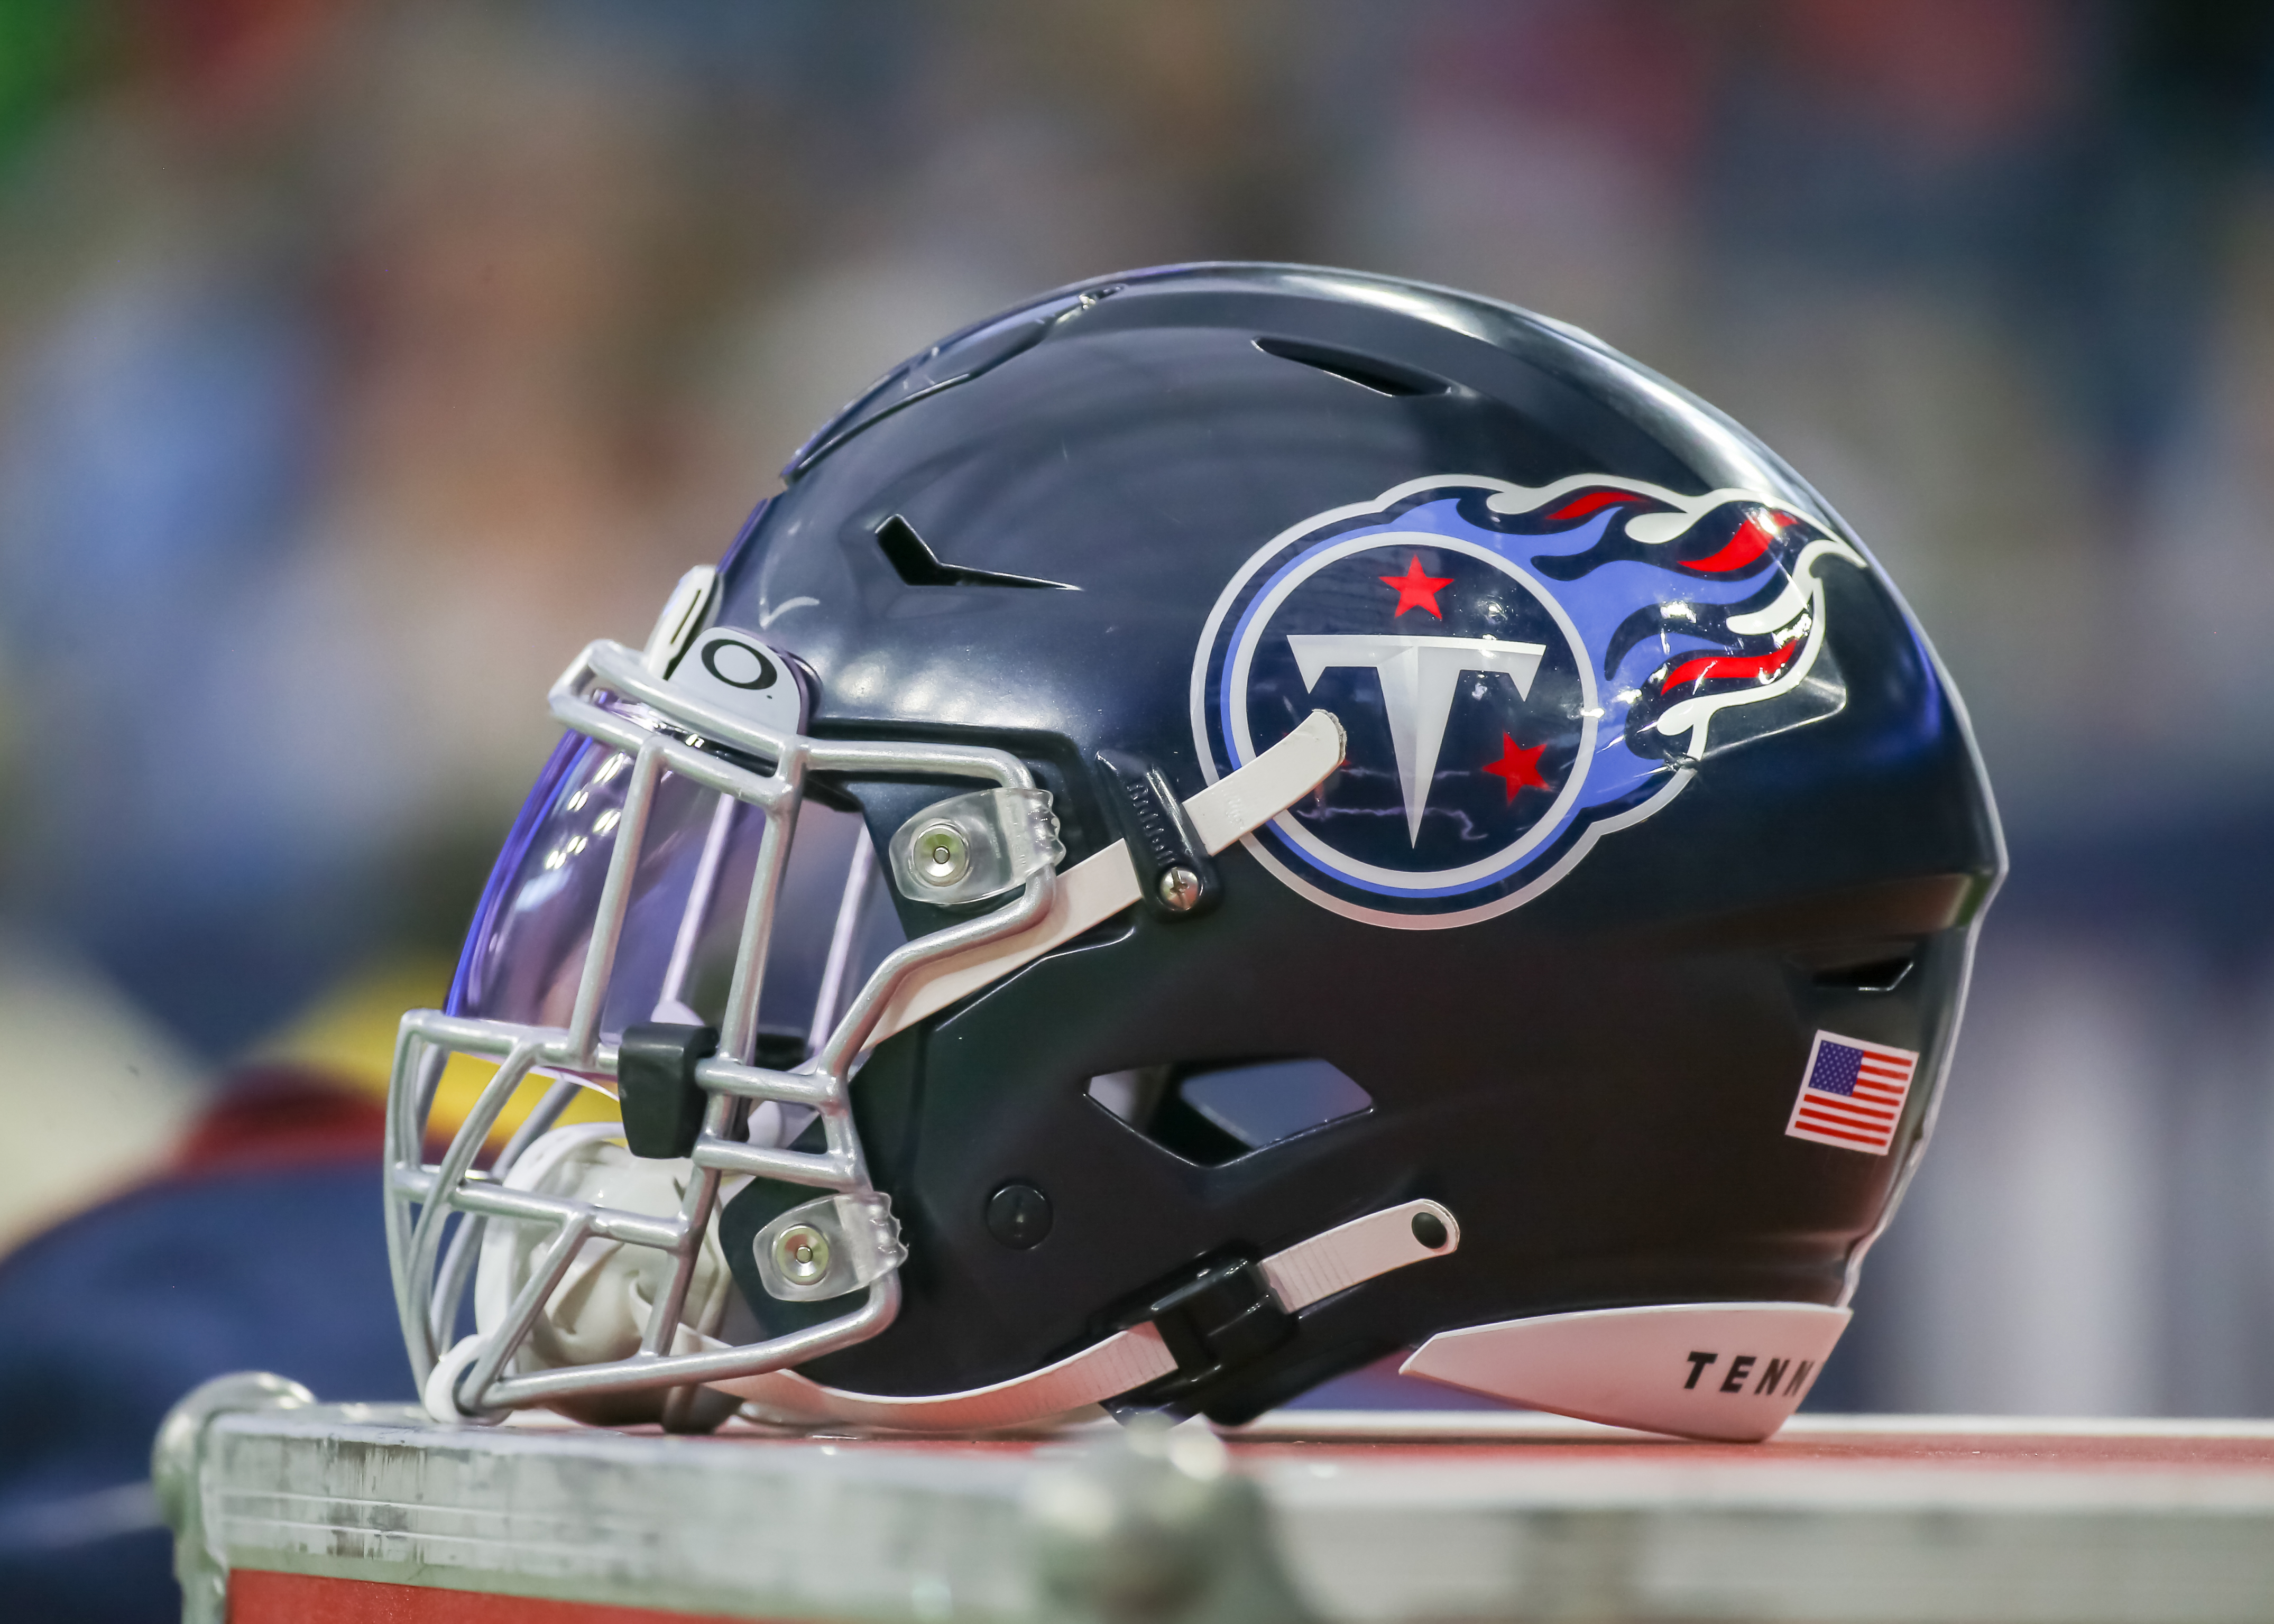 Titans helmet sits on the sideline during a game